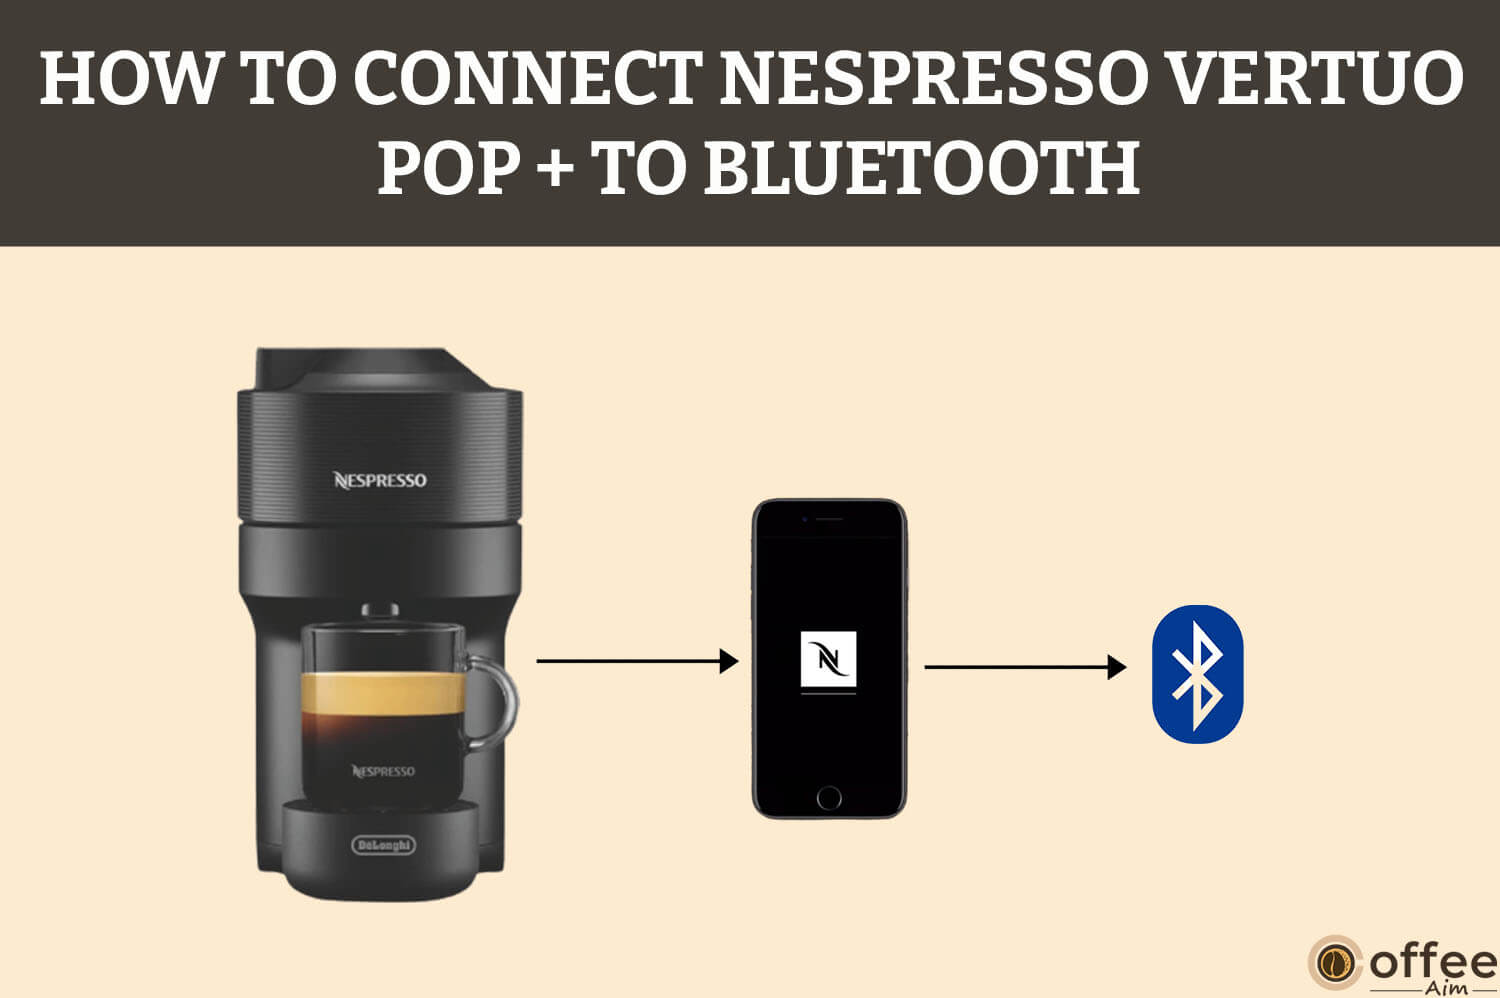 The image depicts the connectivity of the Nespresso Verto Pop Plus machine with Bluetooth.